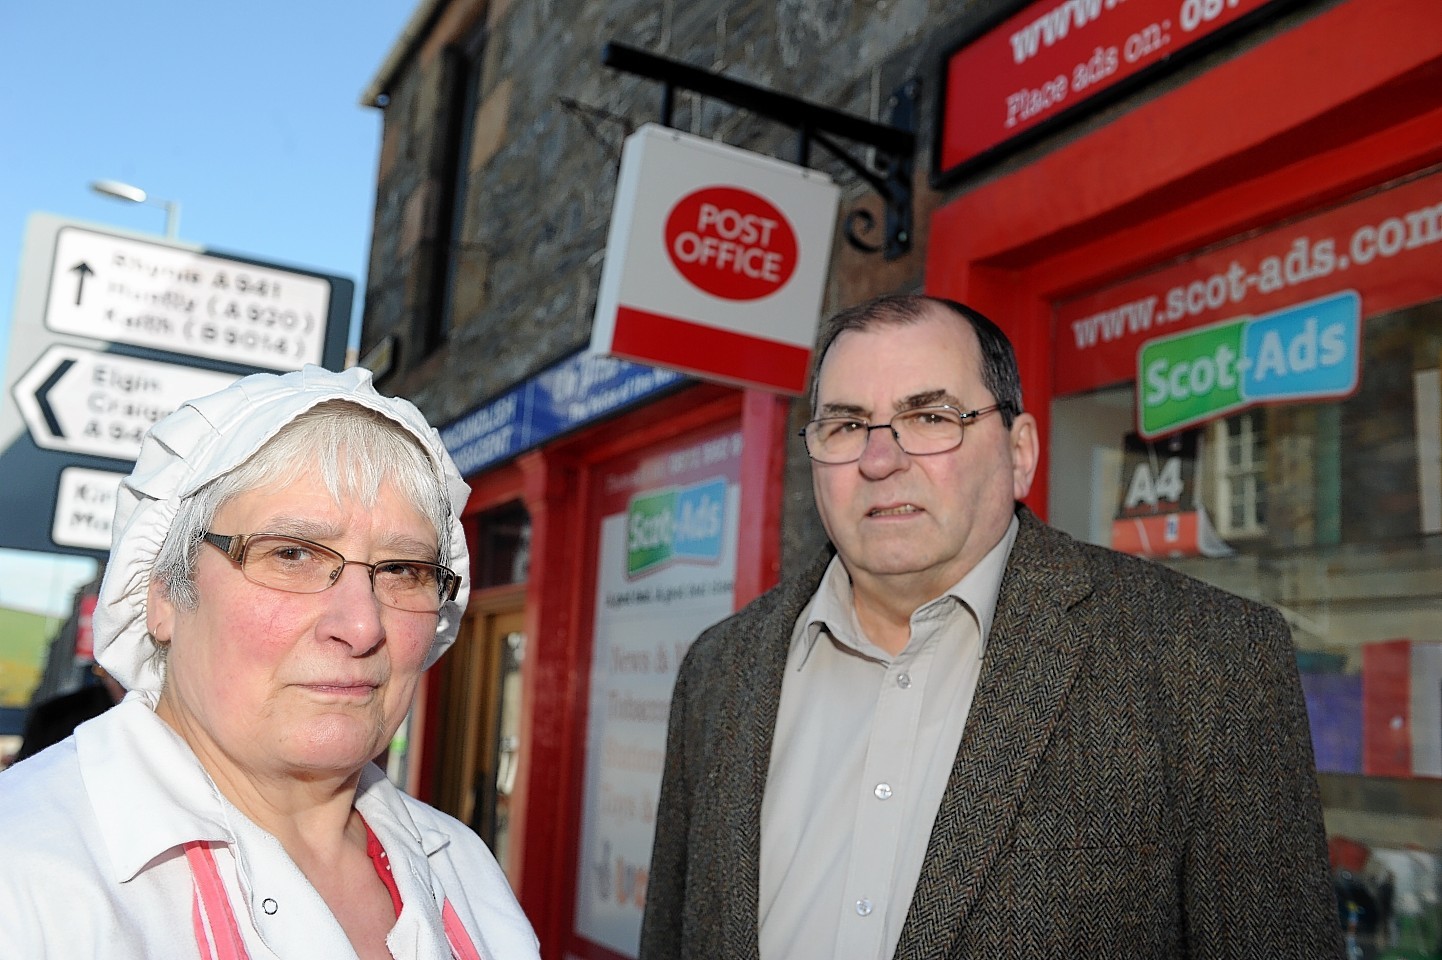 Bunty Campbell, left, chairman of Dufftown Community Council, and Moray councillor Mike McConnachie, right, outside Dufftown Post Office which closed suddenly. Picture by Gordon Lennox